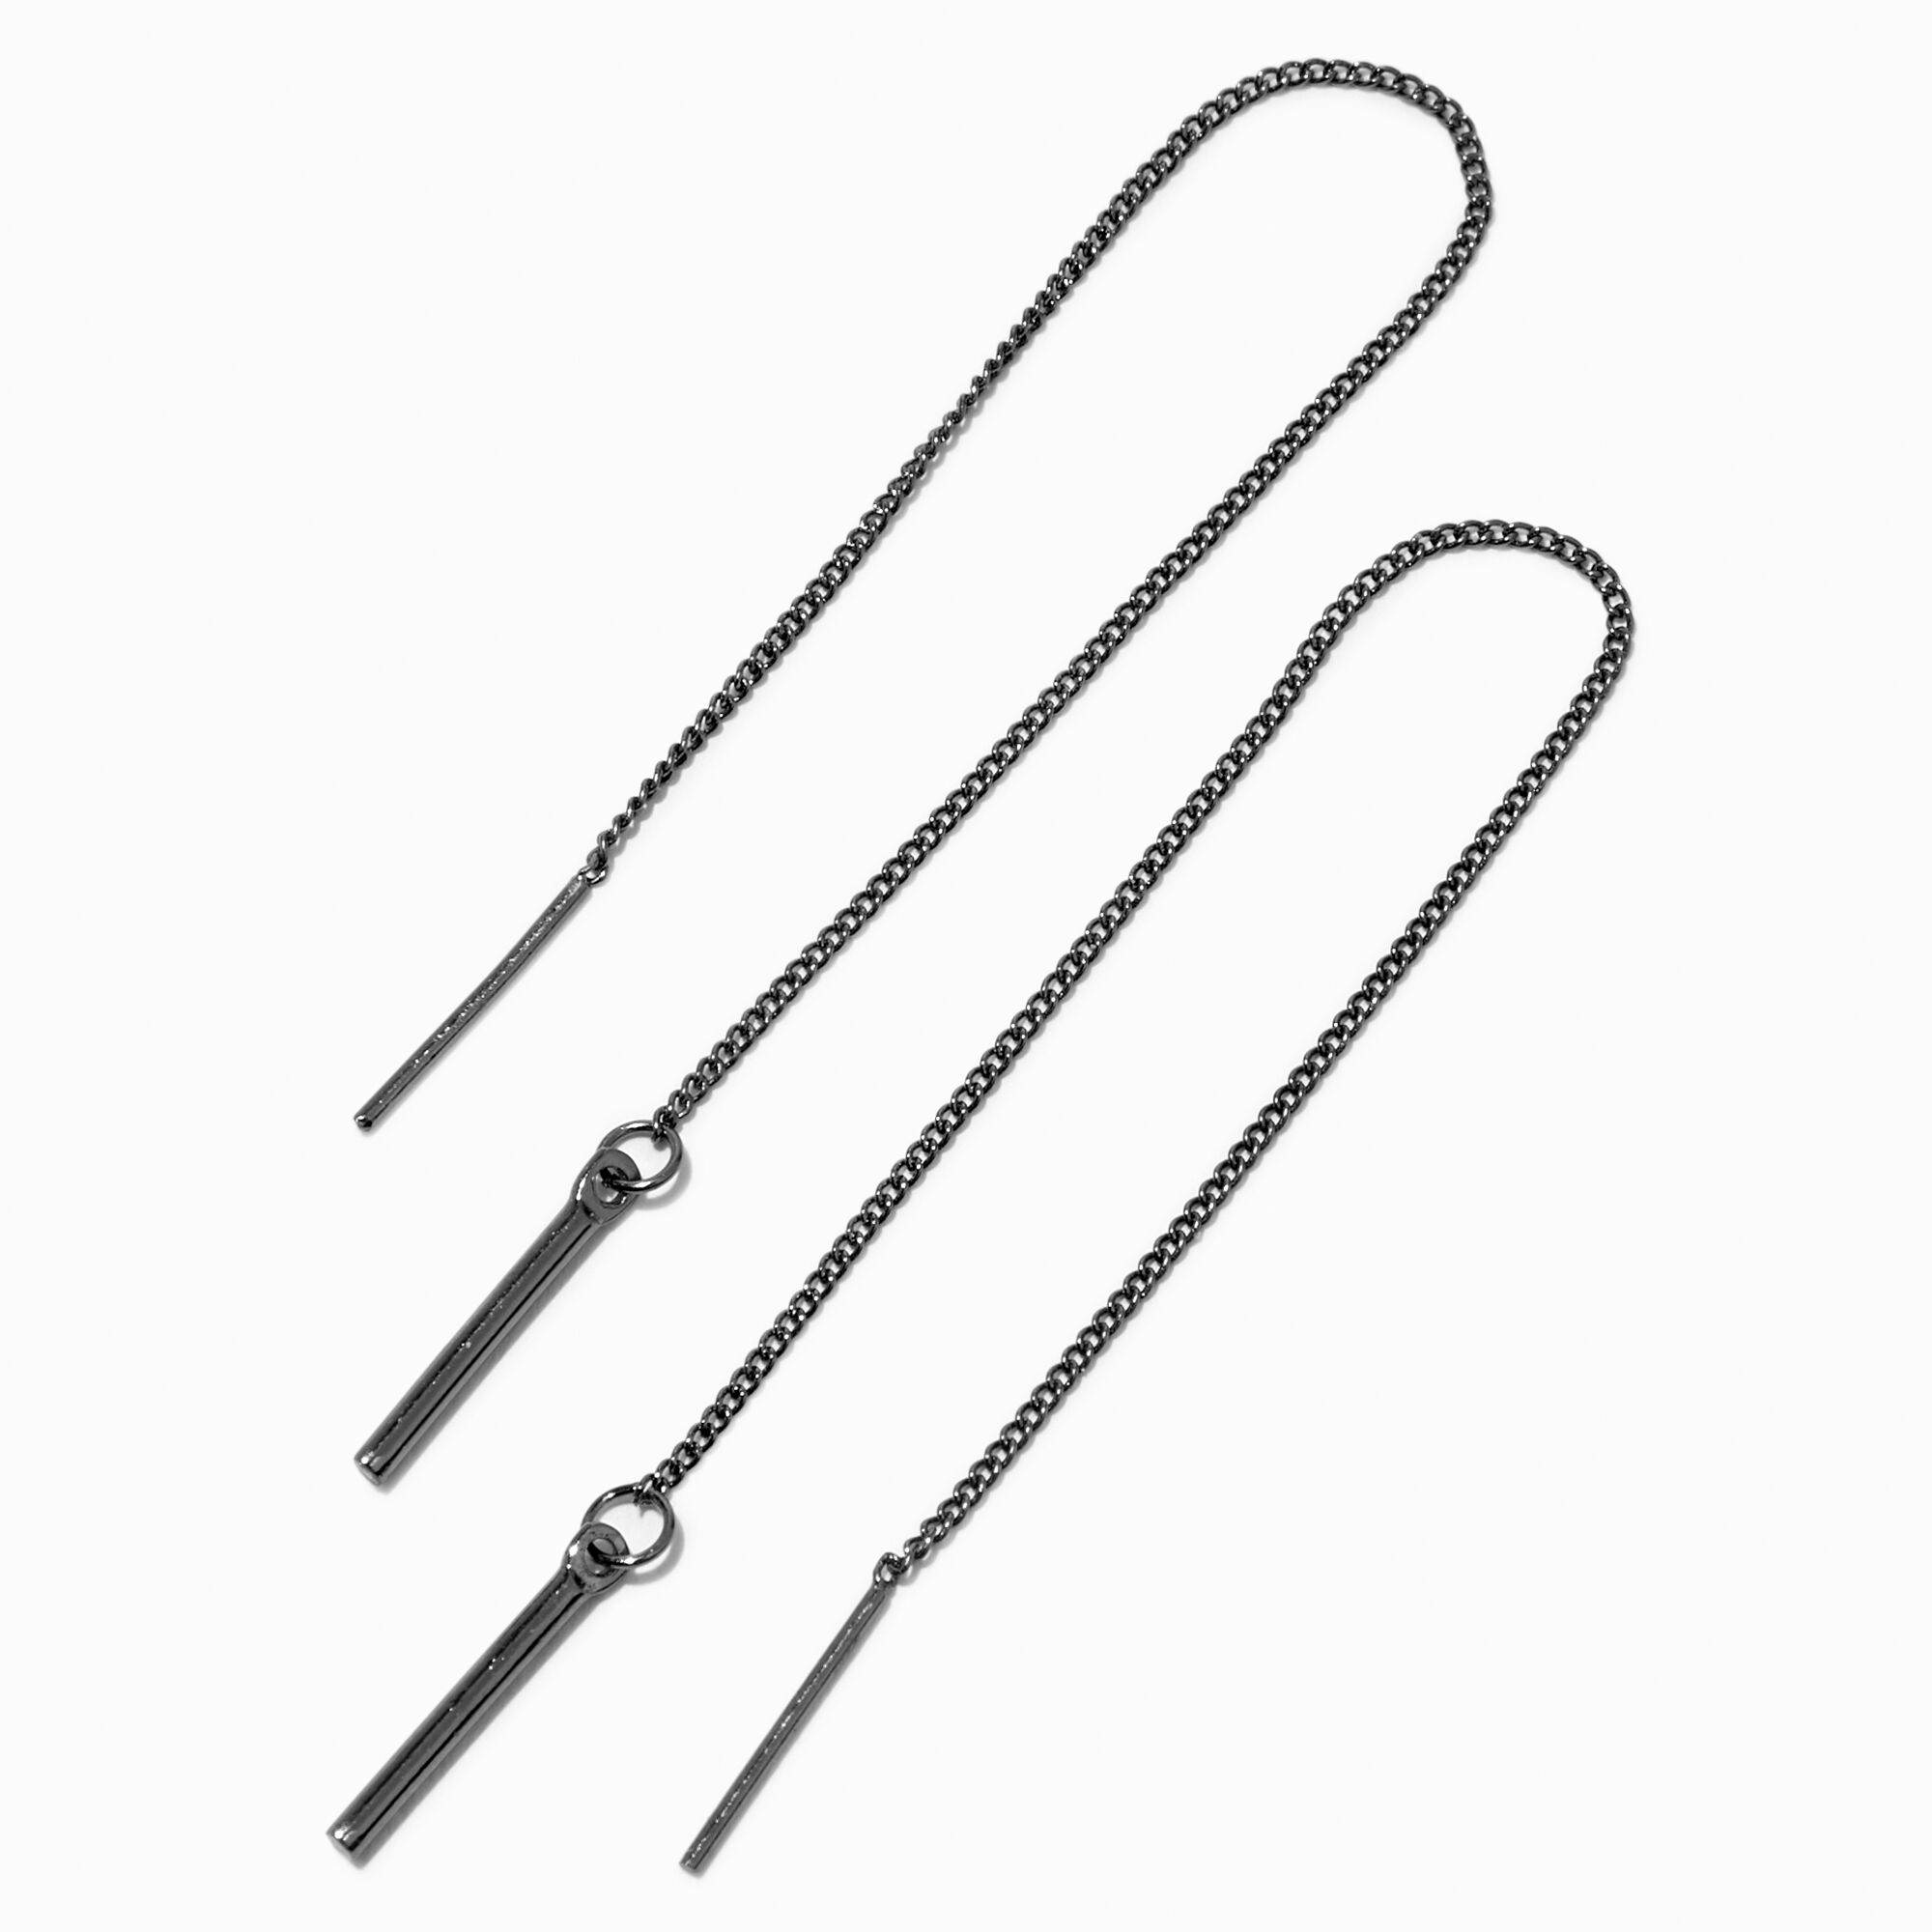 View Claires Hematite 4 Linear Bar Threader Drop Earrings information